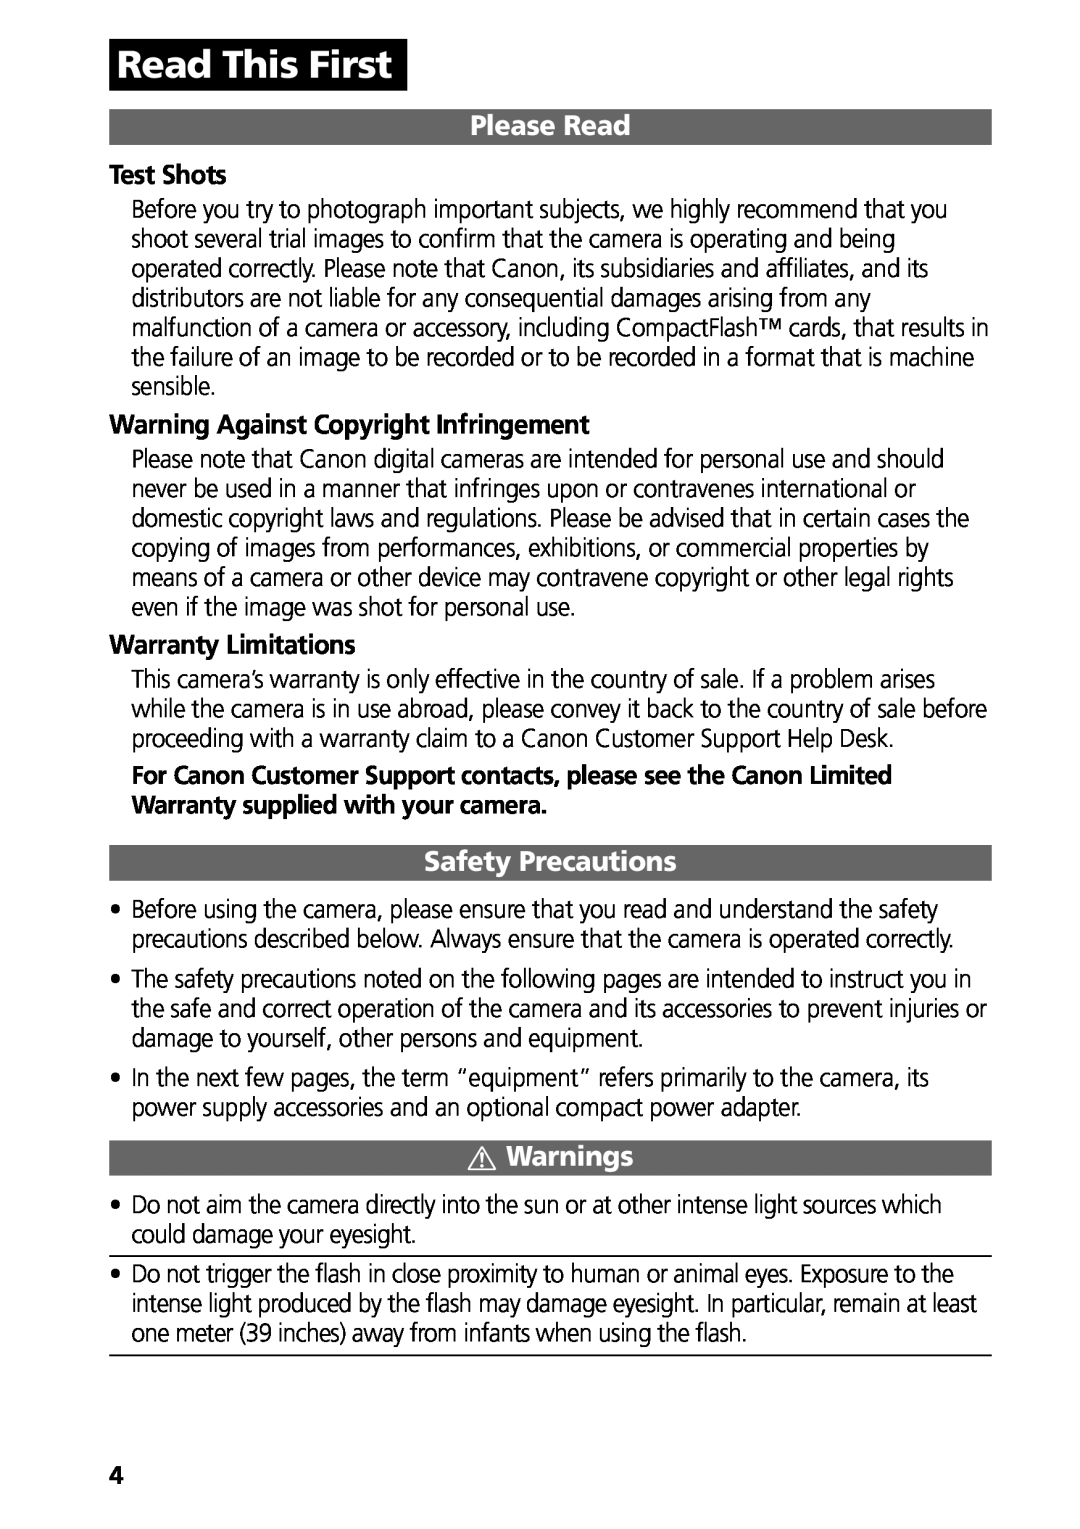 Canon G3 Read This First, Please Read, Safety Precautions, Warnings, Test Shots, Warning Against Copyright Infringement 